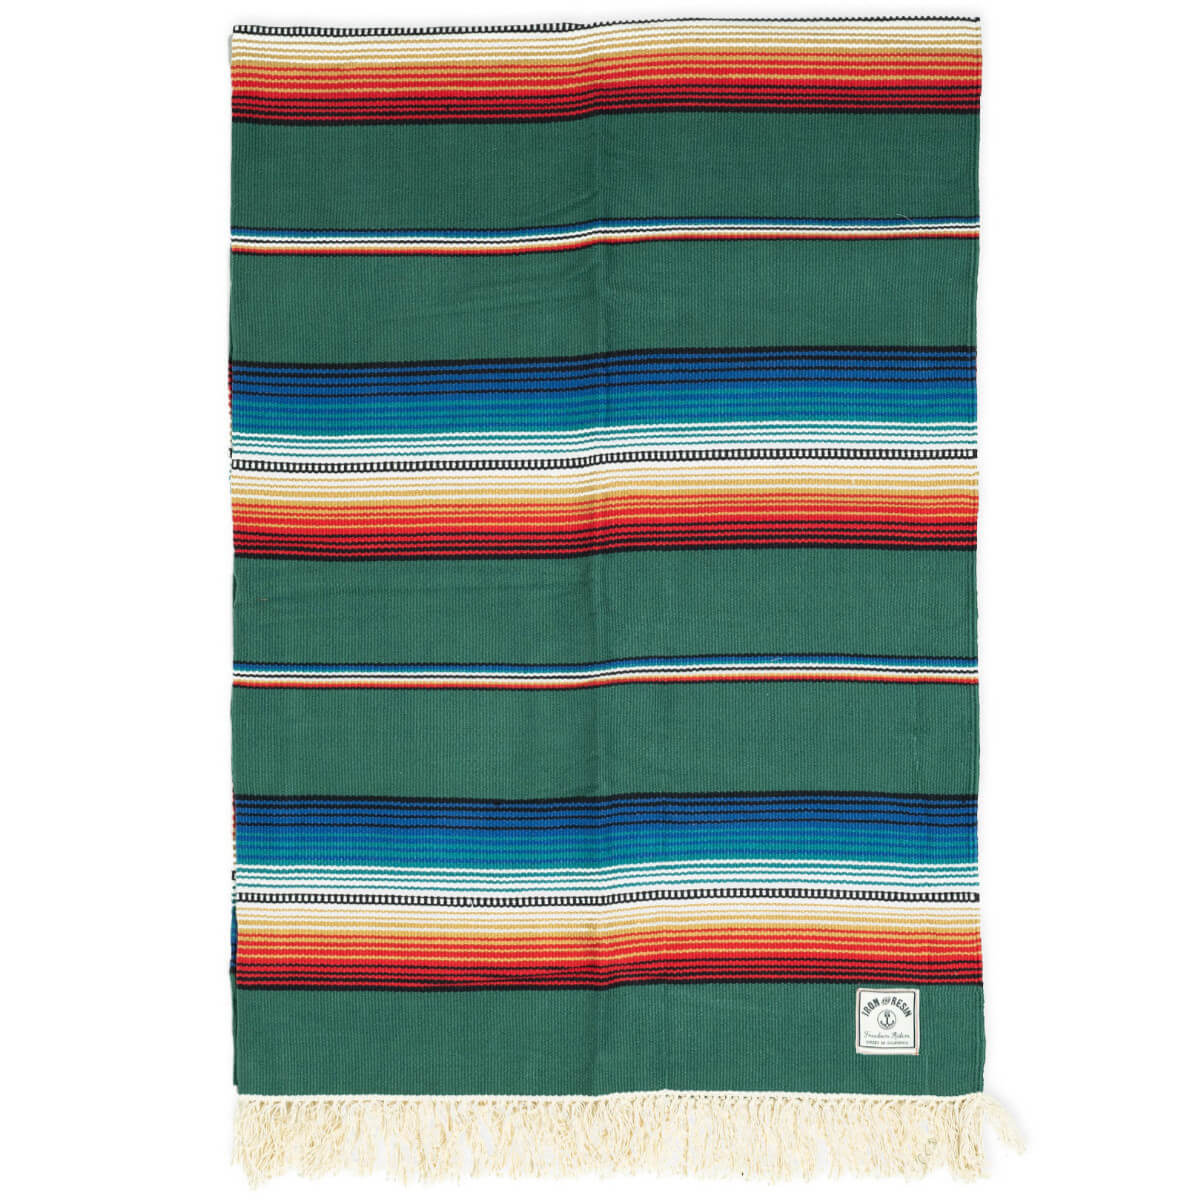 Iron and Resin Del Sol Cotton Blanket, Camping Blanket